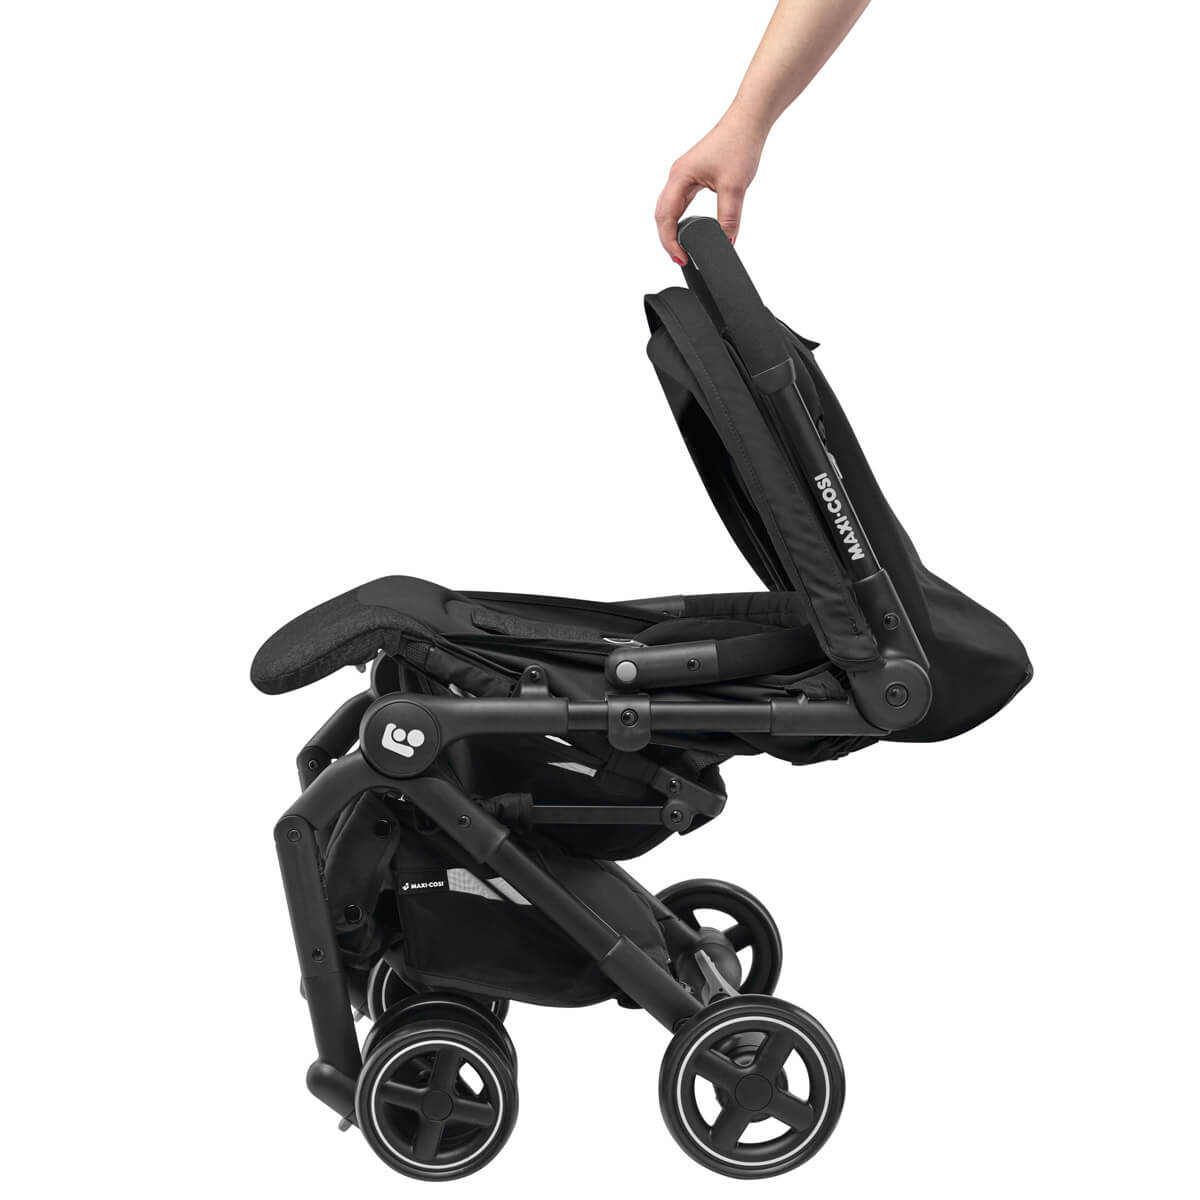 The Maxi-Cosi Lara strollers can be folded with 1 button push.